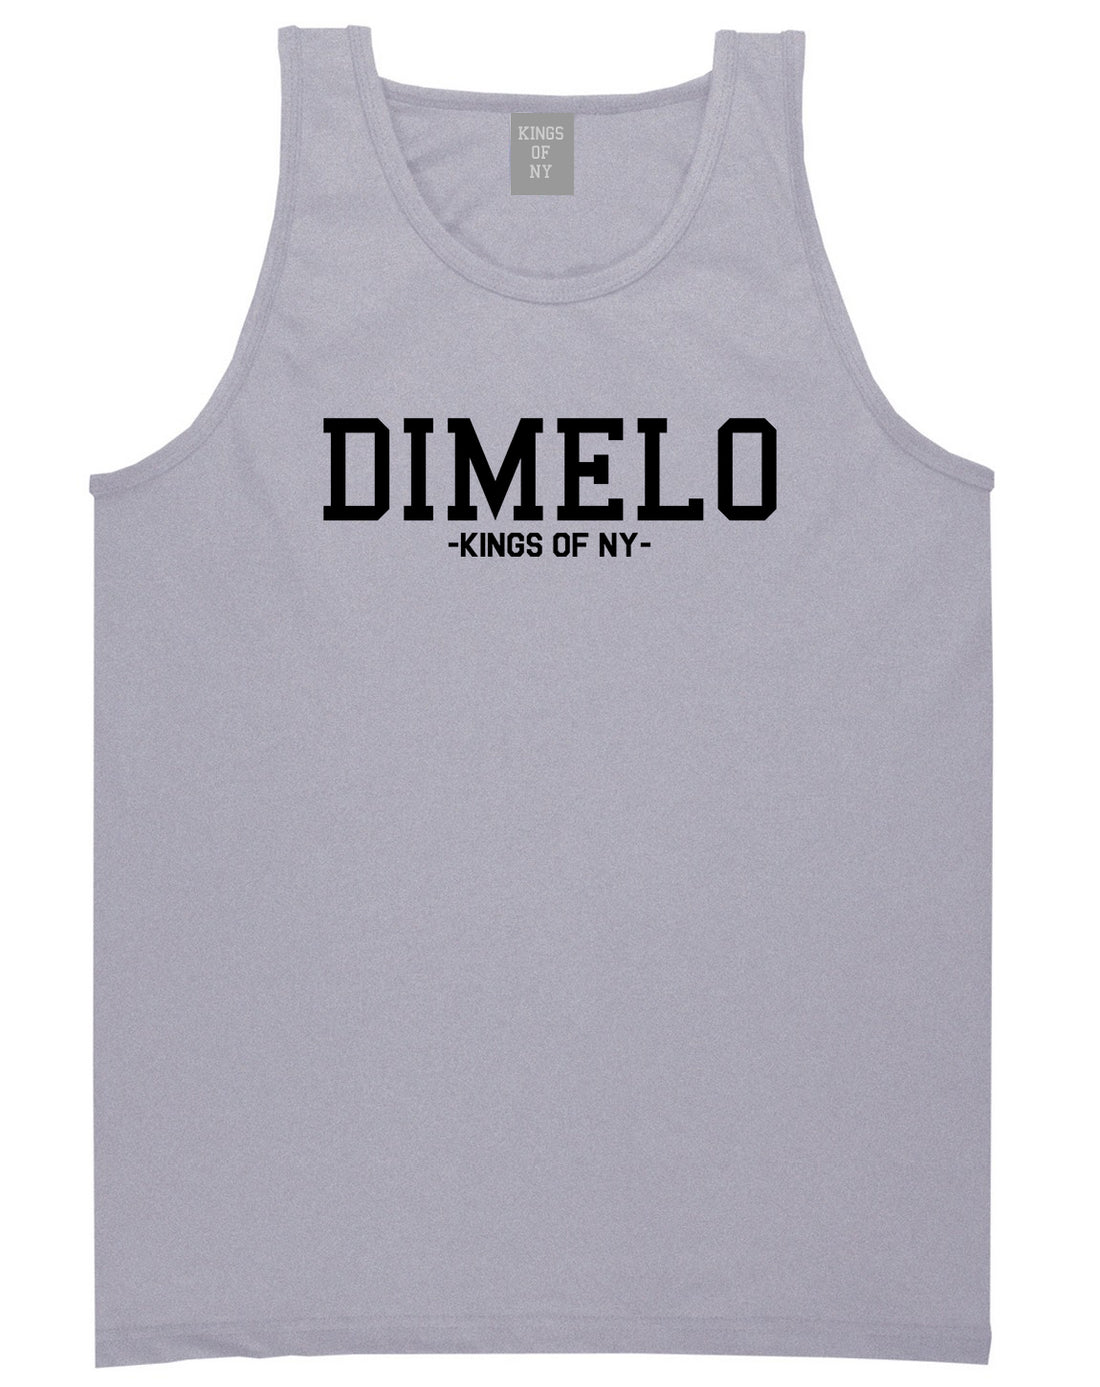 Dimelo Kings Of NY Tank Top Shirt in Grey